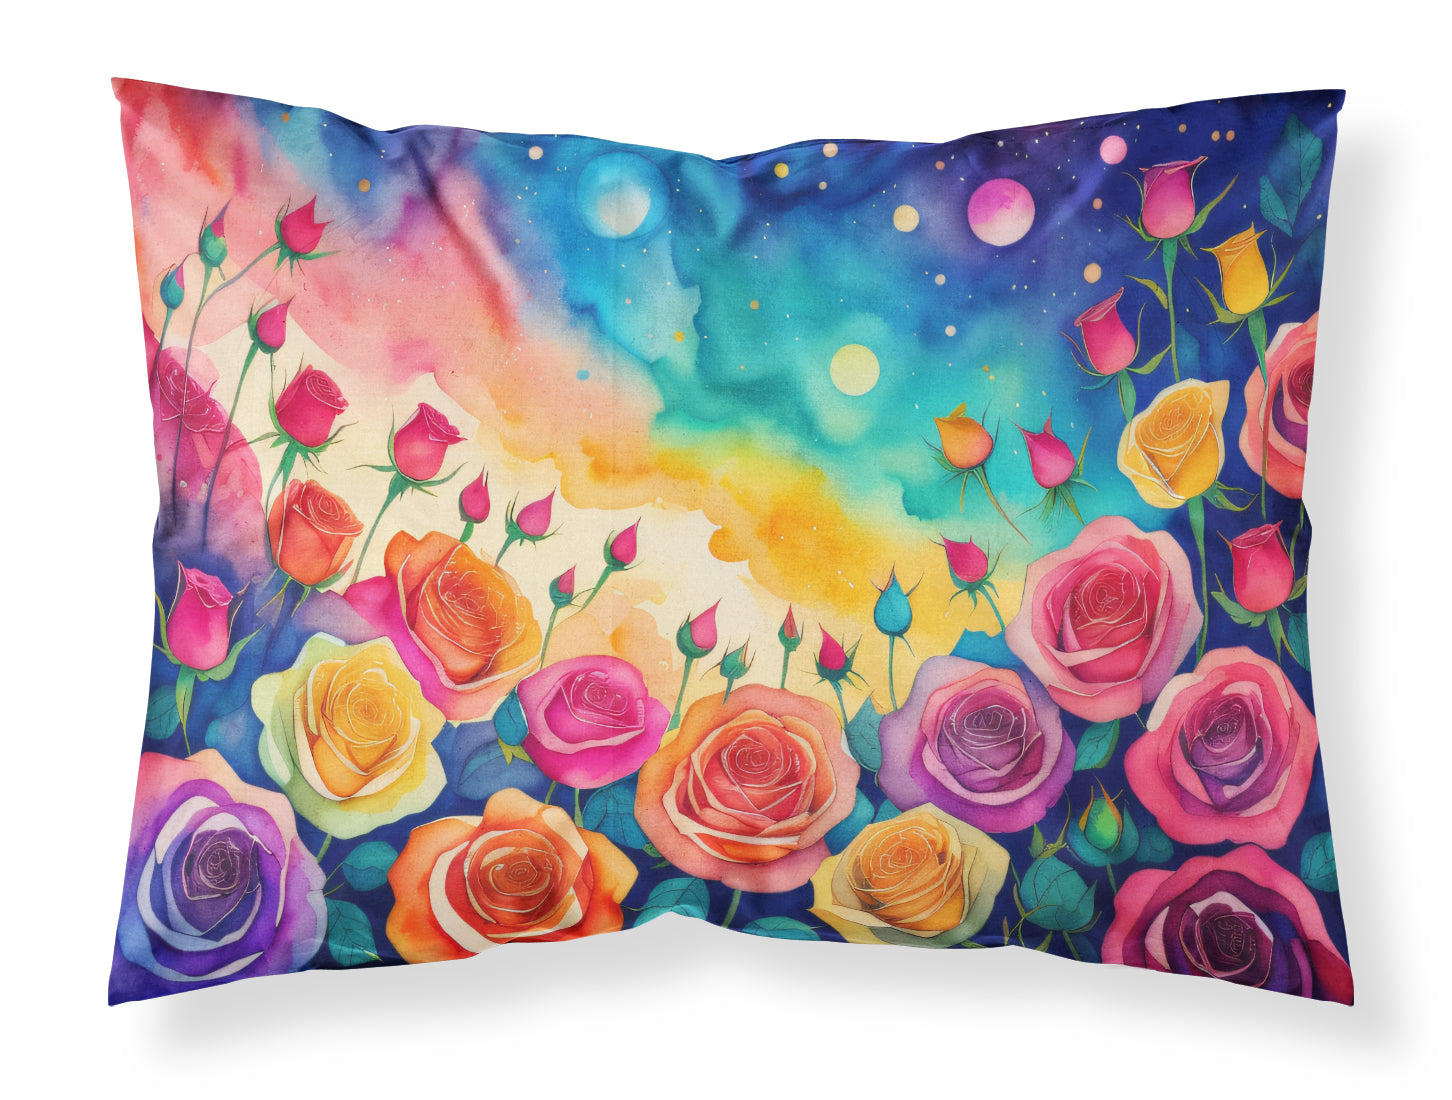 Buy this Roses in Color Fabric Standard Pillowcase